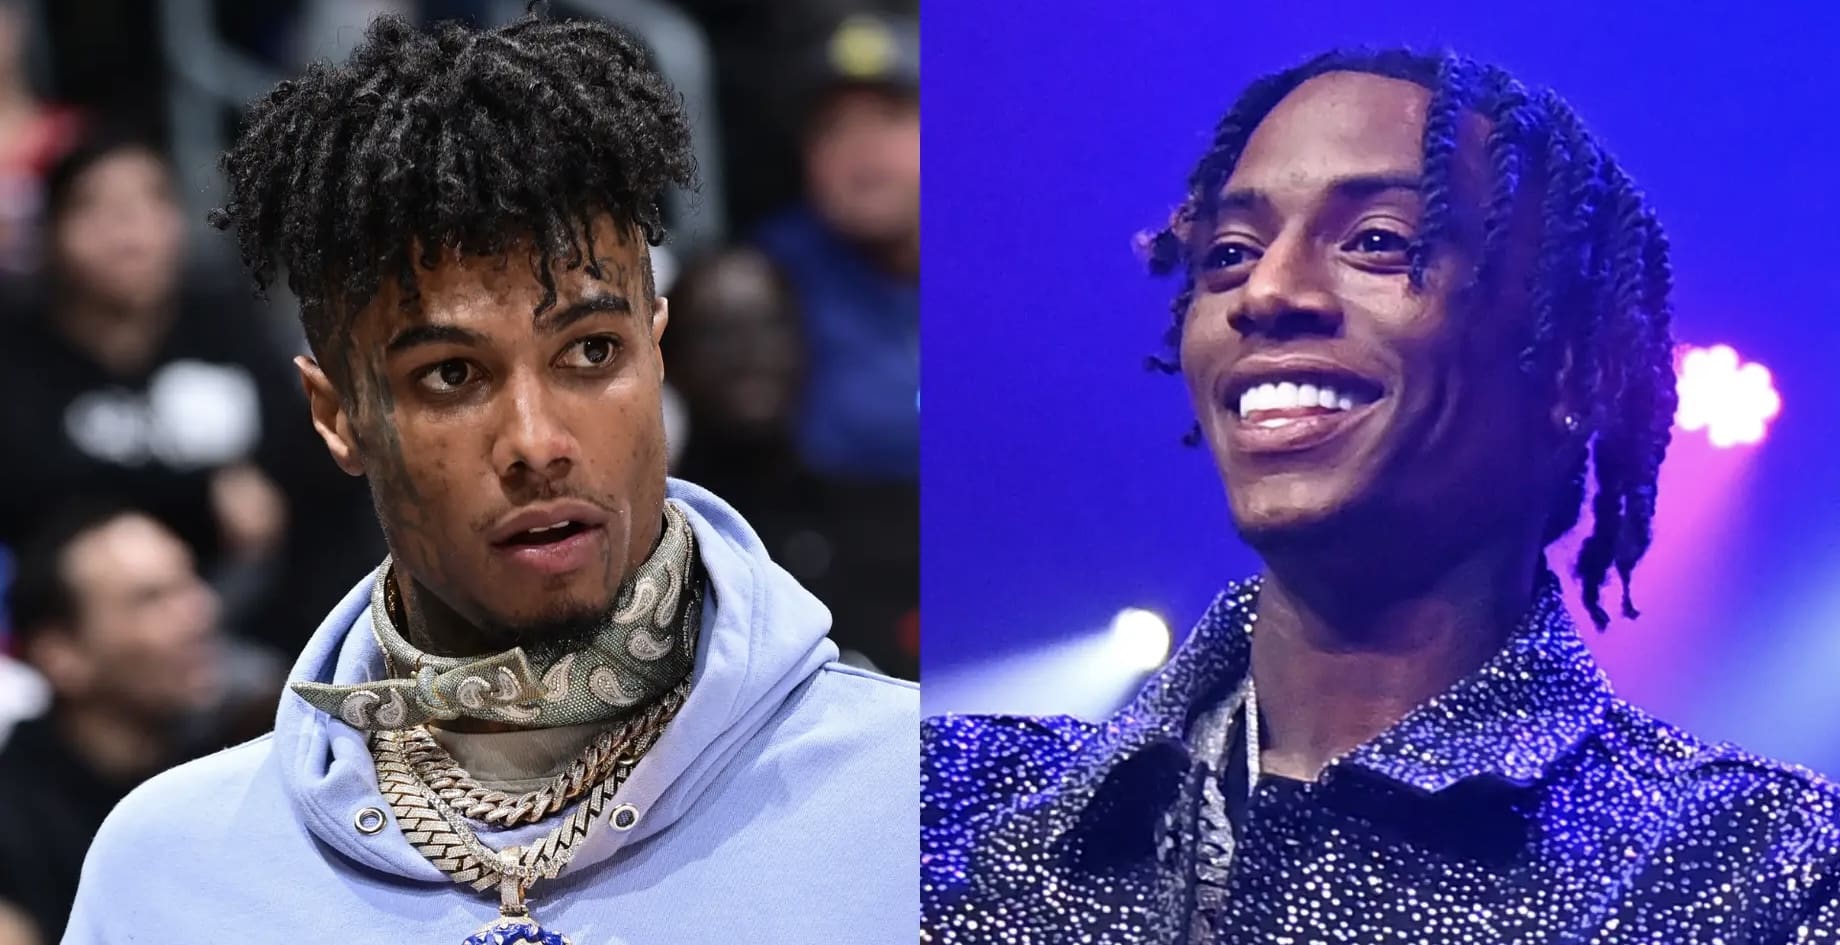 Soulja Boy’s Girlfriend Served Blueface With Lawsuit at LA Club Days Before He Was Locked Up